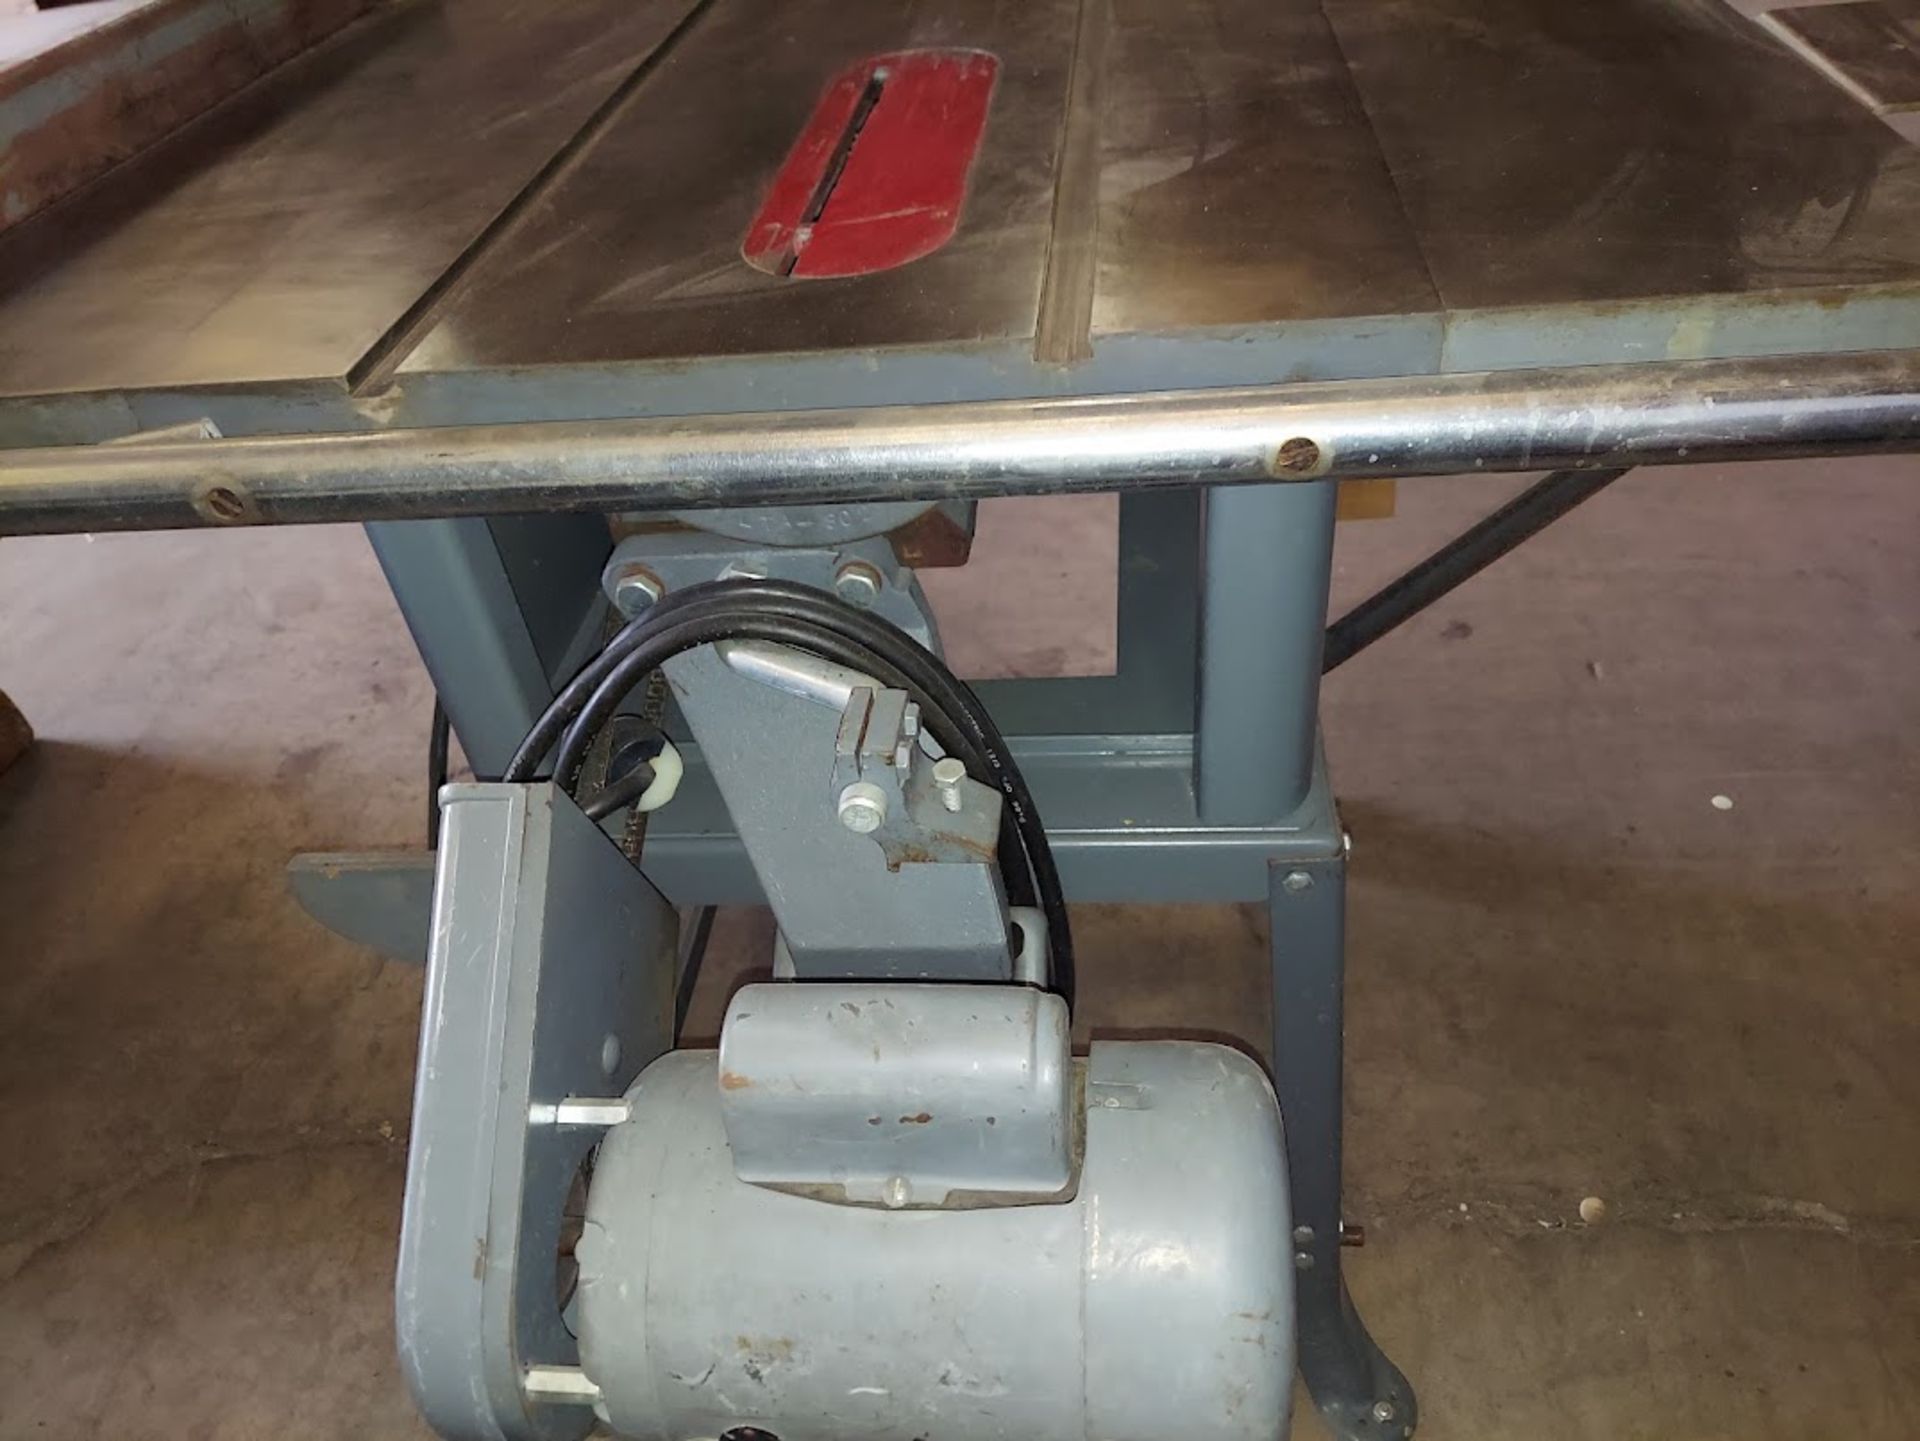 Rockwell / Delta 10" Contractors Table Saw, 1 hp, 115/230 volts 1ph - Image 4 of 5